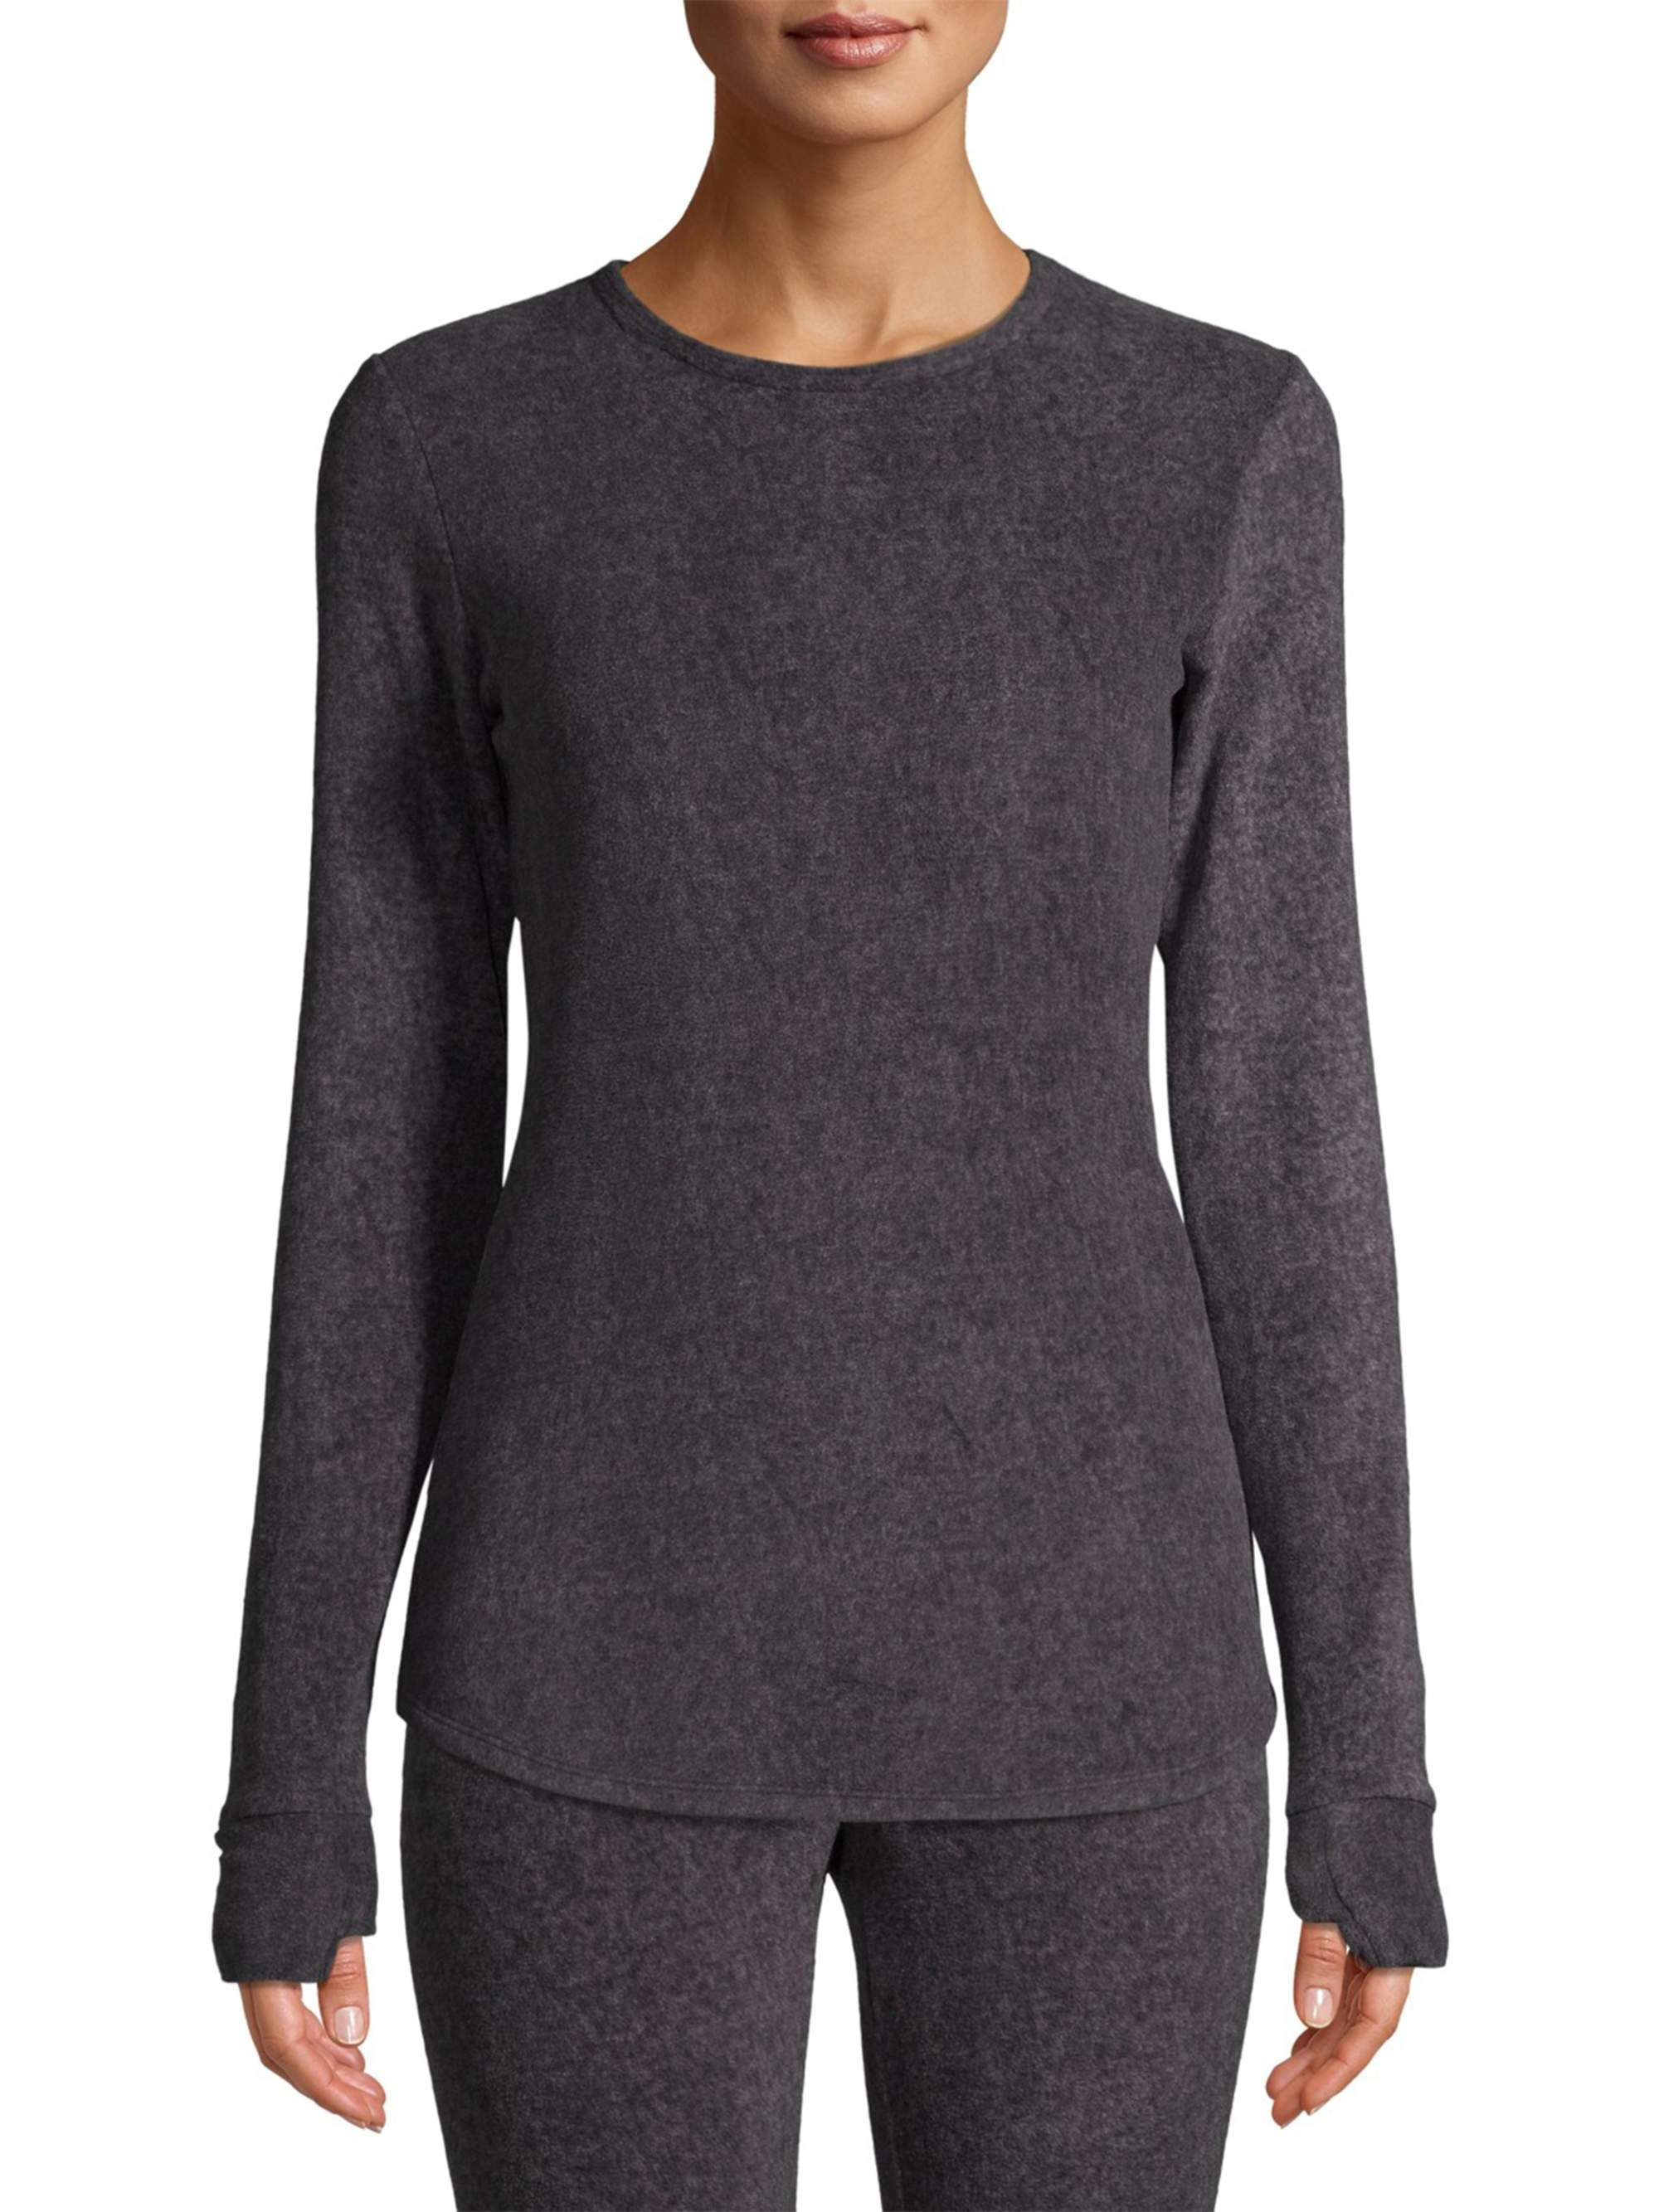 ClimateRight by Cuddl Duds Women's Stretch Fleece Base Layer Crewneck  Thermal Top with Cuff Thumbhole 